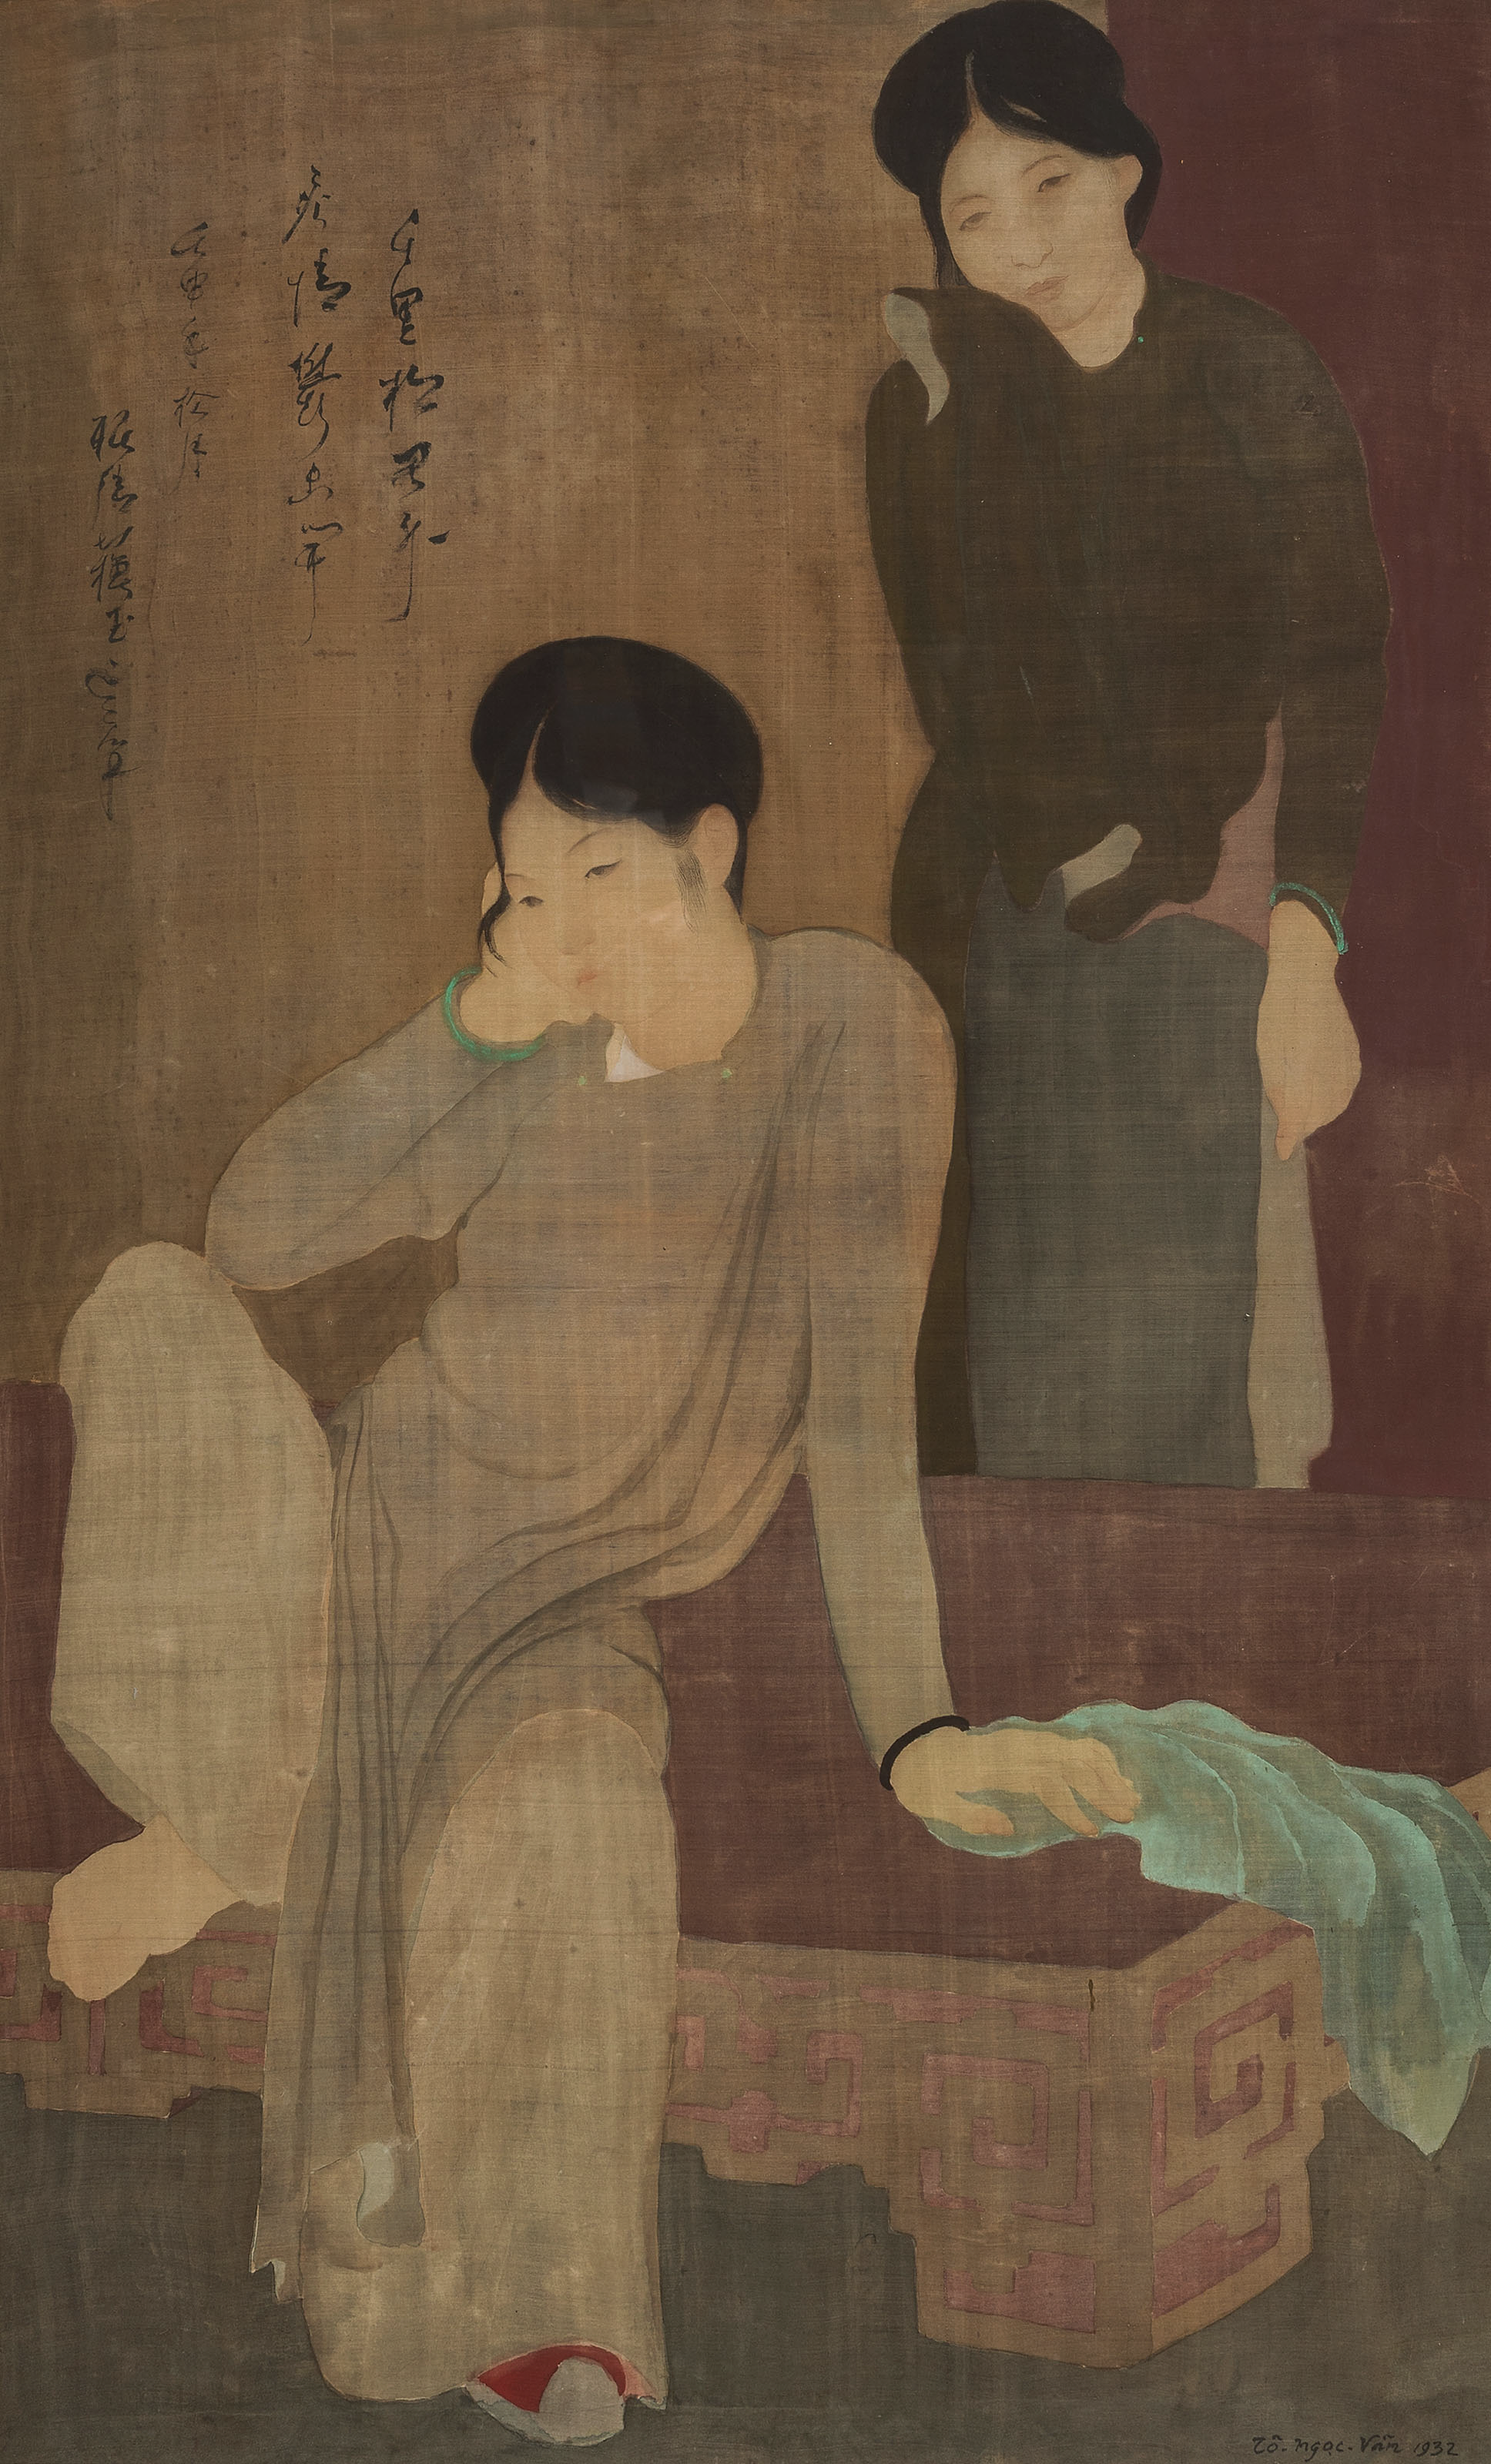 TO NGOC VAN (VIETNAM, 1906-1954)
Les Désabusées (Disillusionment)
signed and dated 'To ngoc Van 1932'; inscribed in Chinese (upper left)
ink and gouache on silk
92.5 x 57 cm. (36 3/8 x 22 1/2 in.)
Painted in 1932

Provenance
Agence Economique de l'Indochine (AGINDO), Paris
Private Collection, Paris, 1993
Anon. Sale, Sotheby's Singapore, 6 April 2003, lot 110
Acquired at the above sale by the present owner
Collection of Mr Tuan H Pham, California, USA

Exhibited
Singapore, Singapore Art Museum, Visions and Enchantment, South East Asian Paintings, June - August 2000.
Morlanwelz, Belgium, Musee Royal de Mariemont, La fleur du pecher et l'oiseau d'azur, April – August 2002.

"The words of a poem endure the bites without complaints,
And my heart's blood gushes out and spreads everywhere.
This poetry is in my heart and never stops singing,
Its plaintive echoes resonate all around. "
Han Mac Tu (1912-1940)
Attachment

"Voyaging far away from home my affection is like a flower in despair longing for the bloom": the painter delivers us a handwritten clue for a better understanding of his work.

The hard-felt disillusion through these two elegant women in their posture expressing prostration and, or disillusionment, is accentuated by the rich furnishing and the smart clothing of these two women. What is it for the artist: a recognition or an illusion of prospection? In other words, does he express the end of one world or does he offer the possibility of a new one? In 1932, To Ngoc Van, Inguimberty's favourite student, is evoking more than he is assertive.

His style would later evolve into a politically militant style, but for the moment Ngoc was not yet part of the revolutionary movement that he would join in August 1945. When he worked on this painting, he was also not yet the first director of the Ecole des Beaux-arts de la Résistance which would open in Dai Tu in the Thai Nguyen province where he would joined his colleagues Tran Van Can, Nguyen Khang and Nguyen Tu Nghiem, among others.

Yet in this work we can already find the principal themes of 20th Century Vietnamese propaganda art. If we are far from the slogans 'fight and build' and 'learn to live', this work reflects more of a change of milieu rather than of theme. The status of Vietnamese women, the legitimacy of an elite class, the influence of the West, the eventual submission to Chinese influence; all already exist in this painting.

The Vietnamese women are beautiful, elegant and refined and are presented in a similar setting. To Ngoc Van succeeds in creating an outstanding work of art which is also a political manifesto, with subtleness and irreproachable technique. He illustrates a theme (including the constant evocation of the Trung sisters who opposed the Chinese invasion of Vietnam in 43 A.D.) that challenges the Vietnamese identity. All is already inherent in this To Ngoc Van's work dated 1932: Confucianism, nationalism, cosmopolitanism, the span of history. The entire history of Vietnamese painting is contained in these varied, sometimes contradictory, but always talented responses to these major and universal questions.


The Tuan Pham Collection 
Elegance Of The Heart And Vietnamese Masterworks 

A man with a quiet smile despite heavy odds is most likely a survivor. And the collector Tuan Pham has a quiet smile that's both peaceful and subtle. 

From the outset, we understand that from a long time since, he knows that words are the scars of the soul: a sense of self-restraint in his expression, choosing to hold back a little. Let's hope he will forgive us for getting him to say a few words on himself and his splendid collection, our best ally in our intrusive quest in Vietnamese fine art. 

An extraordinary collection started 30 years ago: 
“…during one of my leisure vacations in South Florida in the late 1990s, I was walking by a small gallery and caught a glimpse of a small painting. It was a still life composition with vase and flowers. The vase was blue and white, reminiscing of the 19th century vase exported from China. The flower was beautiful yellow and blue, and in the obscured background was the Eiffel Tower. There was a story within the painting to be discovered. As I approached the painting, I saw that it was signed in Chinese characters above the name Le Pho (which I thought was Li Pho, a Chinese name). I purchased the painting without realizing that Le Pho was an artist from Vietnam. It was the first painting in my Vietnamese collection, and it started a personal journey that reconnects me with my birthplace.” 

Taking a prophetic meaning, this first purchase resembles more a manifesto in that it condenses yet encompasses all the elements that give the 20th Century Vietnamese paintings its true universal value. Vietnam, where the painter Le Pho was born in Hadong near Hanoi), France (the Eiffel Tower), China (the vase), America (South Florida), all clues that define the Vietnamese pictorial approach. 

But a first stone is not enough to build a castle. Other explanations are perhaps needed to better understand Tuan Pham's pioneer's work. Any successful life consists in consoling the child we once were. It seems to particularly ring true of that for our collector. 

Saigon, April 1975 - a child of thirteen years is with his brother and both are waiting to leave and flee their country. The war rumbles in the city's faubourg, a war the young man barely felt until then, as he was brought up in Dalat in an affluent family. The young Tuan then finds himself in Florida as a refugee, labelled an orphan before getting to California alone with his brother as his whole family (father, mother, and siblings) stayed in Vietnam. He will see them again only 18 years later. 

Overcoming, excelling, surpassing: for Tuan Pham there were no other choices. At a young age he knew already that a quiet stoicism was needed, and that noise and complaint does not do much good. Overcoming the difficulties of the moment, concentration on self, neglecting the derisory: such was the way 'combat' was engaged and won. 

Was he inspired by Nguyen Binh Khiem (1491-1585): 
" In my madness I searched solitude 
The clever ones can mingle in the noise of the world " ? 
(Time Table) 

In 1978, he met the one who would become the love and the strength of his life, Jacqueline Diem Thuy Tran. This and becoming a brilliant PhD graduate in 1989 (University of California, San Diego), would become his first milestones in what would be a path of hard work which led to continued success: 
"I started Phamatech, a biotechnology company and laboratory, in 1992. My mission is to utilize new and emerging technologies to provide greater health awareness, early diagnosis of medical conditions and enhance quality of life and treatment options for patients. Now more than 25 years later, not only was I able to achieve my professional goal in building a respectable and meaningful company, I have been able to share Phamatech's success by giving back to the community. For many years, Phamatech has been a regular sponsor for numerous community events to promote different culture and arts, especially Vietnamese. We help started a non-profit group that teaches Vietnamese language and culture, and for each of the past 10 years, Phamatech has given out college scholarships to many under-privileged students to achieve their dream of attending college.” 

The first part of the collection presented here includes seventeen works and nine painters. Four of these painters would leave Vietnam for a life in France where they will create, live and die. Five others would stay in Vietnam. If it appears like an equitable number between those who left and those who stayed, it is important to mention that the four are represented by twelve works and the five by five works... What really brings to attention in the collection are thematic representations: the over representation of woman, a mother (his mother, the mother of his three sons, Alan, Brian and Daniel); being in love; sisterhood; elegance and grace ; emancipation and freedom; and objects of desire or contemplation. 

The expression of a strict classical Vietnam is also very present by the depictions of women in the traditional ao dai, conical hats, traditional buildings; traditional games; traditional fishing, and the civil mandarin. It is important to note that the divine is barely evoked and that the themes can intersect: in To Ngoc Van's masterpiece Les Désabusées for example where the elegance of the pose doesn't obliterate the power of the message (and its quest for meaning). Vu Cao Dam's Amoureux (Lovers) is also an allusion to the Kim Vân Kiêu. 

There are no landscape paintings either as if the paintings were a mirror in which the collector could gaze at past times. 

The following works featured here are masterpieces, executed by painters at the height and best of their art. To complement the works, we have added poems extracts to enhance and explain the works as a tribute to Tuan Pham, a lover of art and poetry. As a collector of such beautiful paintings on this journey here, we step aside and let him say the last few words here. 

“I have grown attached to many paintings, but like the artist who painted it, it really isn't my painting, and it should continue to find its place among collectors. My journey is complete, and it's time for someone else to start his or her own personal journey.” 

Jean-François Hubert 
Senior Expert, Vietnamese Art